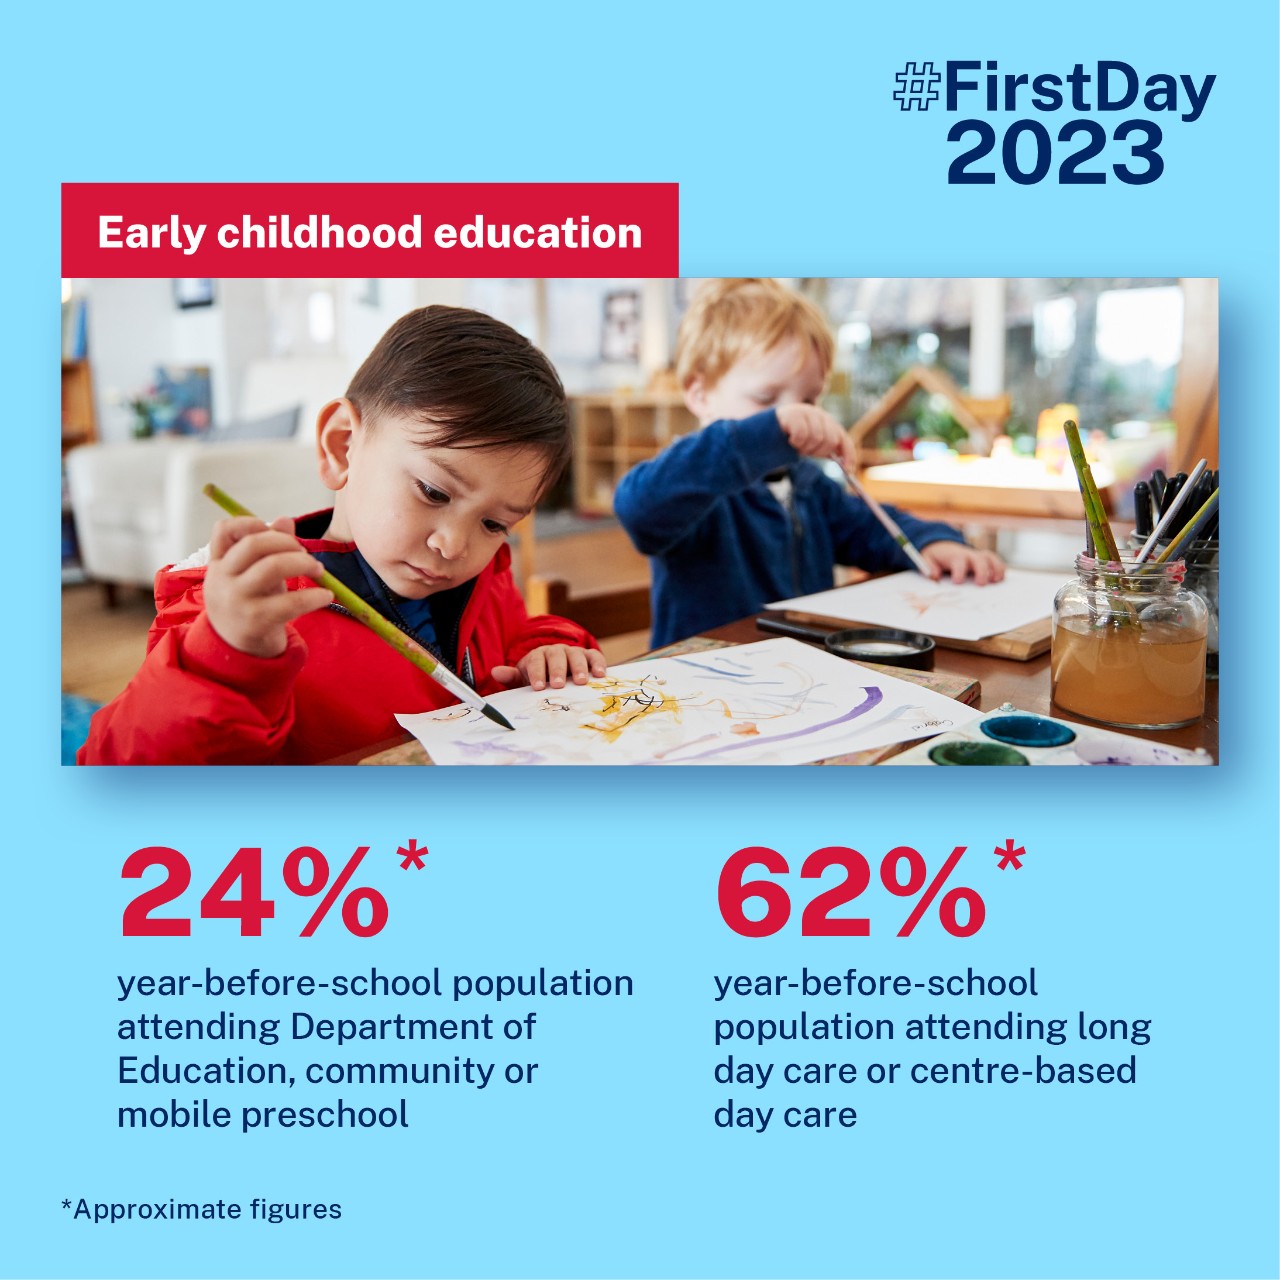 First day 2023 Early childhood education